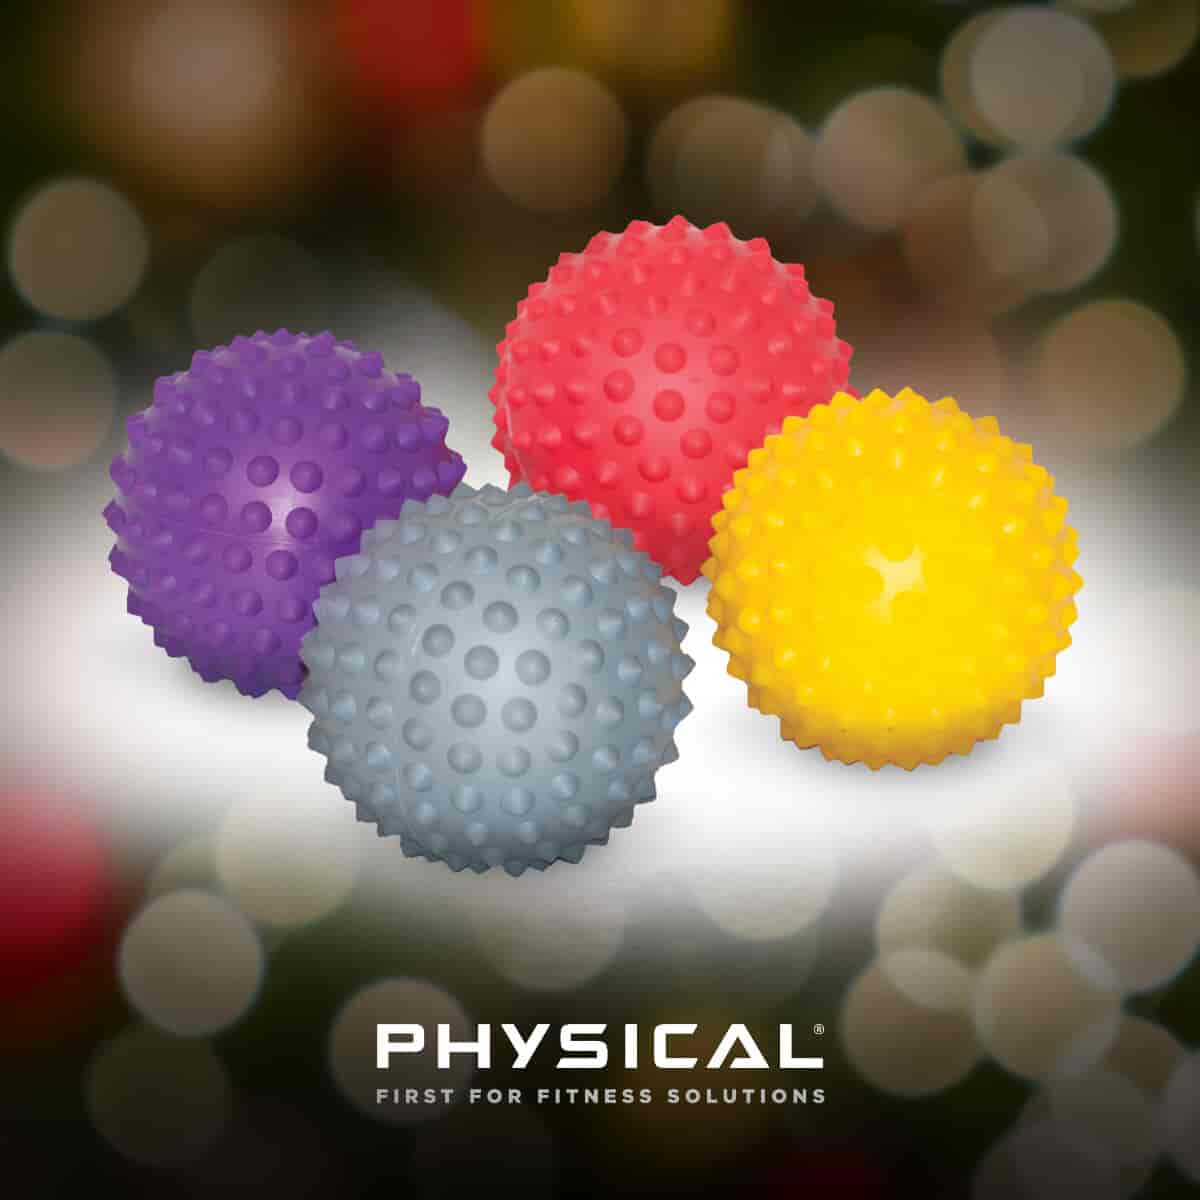 Physical Chritmas Gift Guide - Prickle Balls